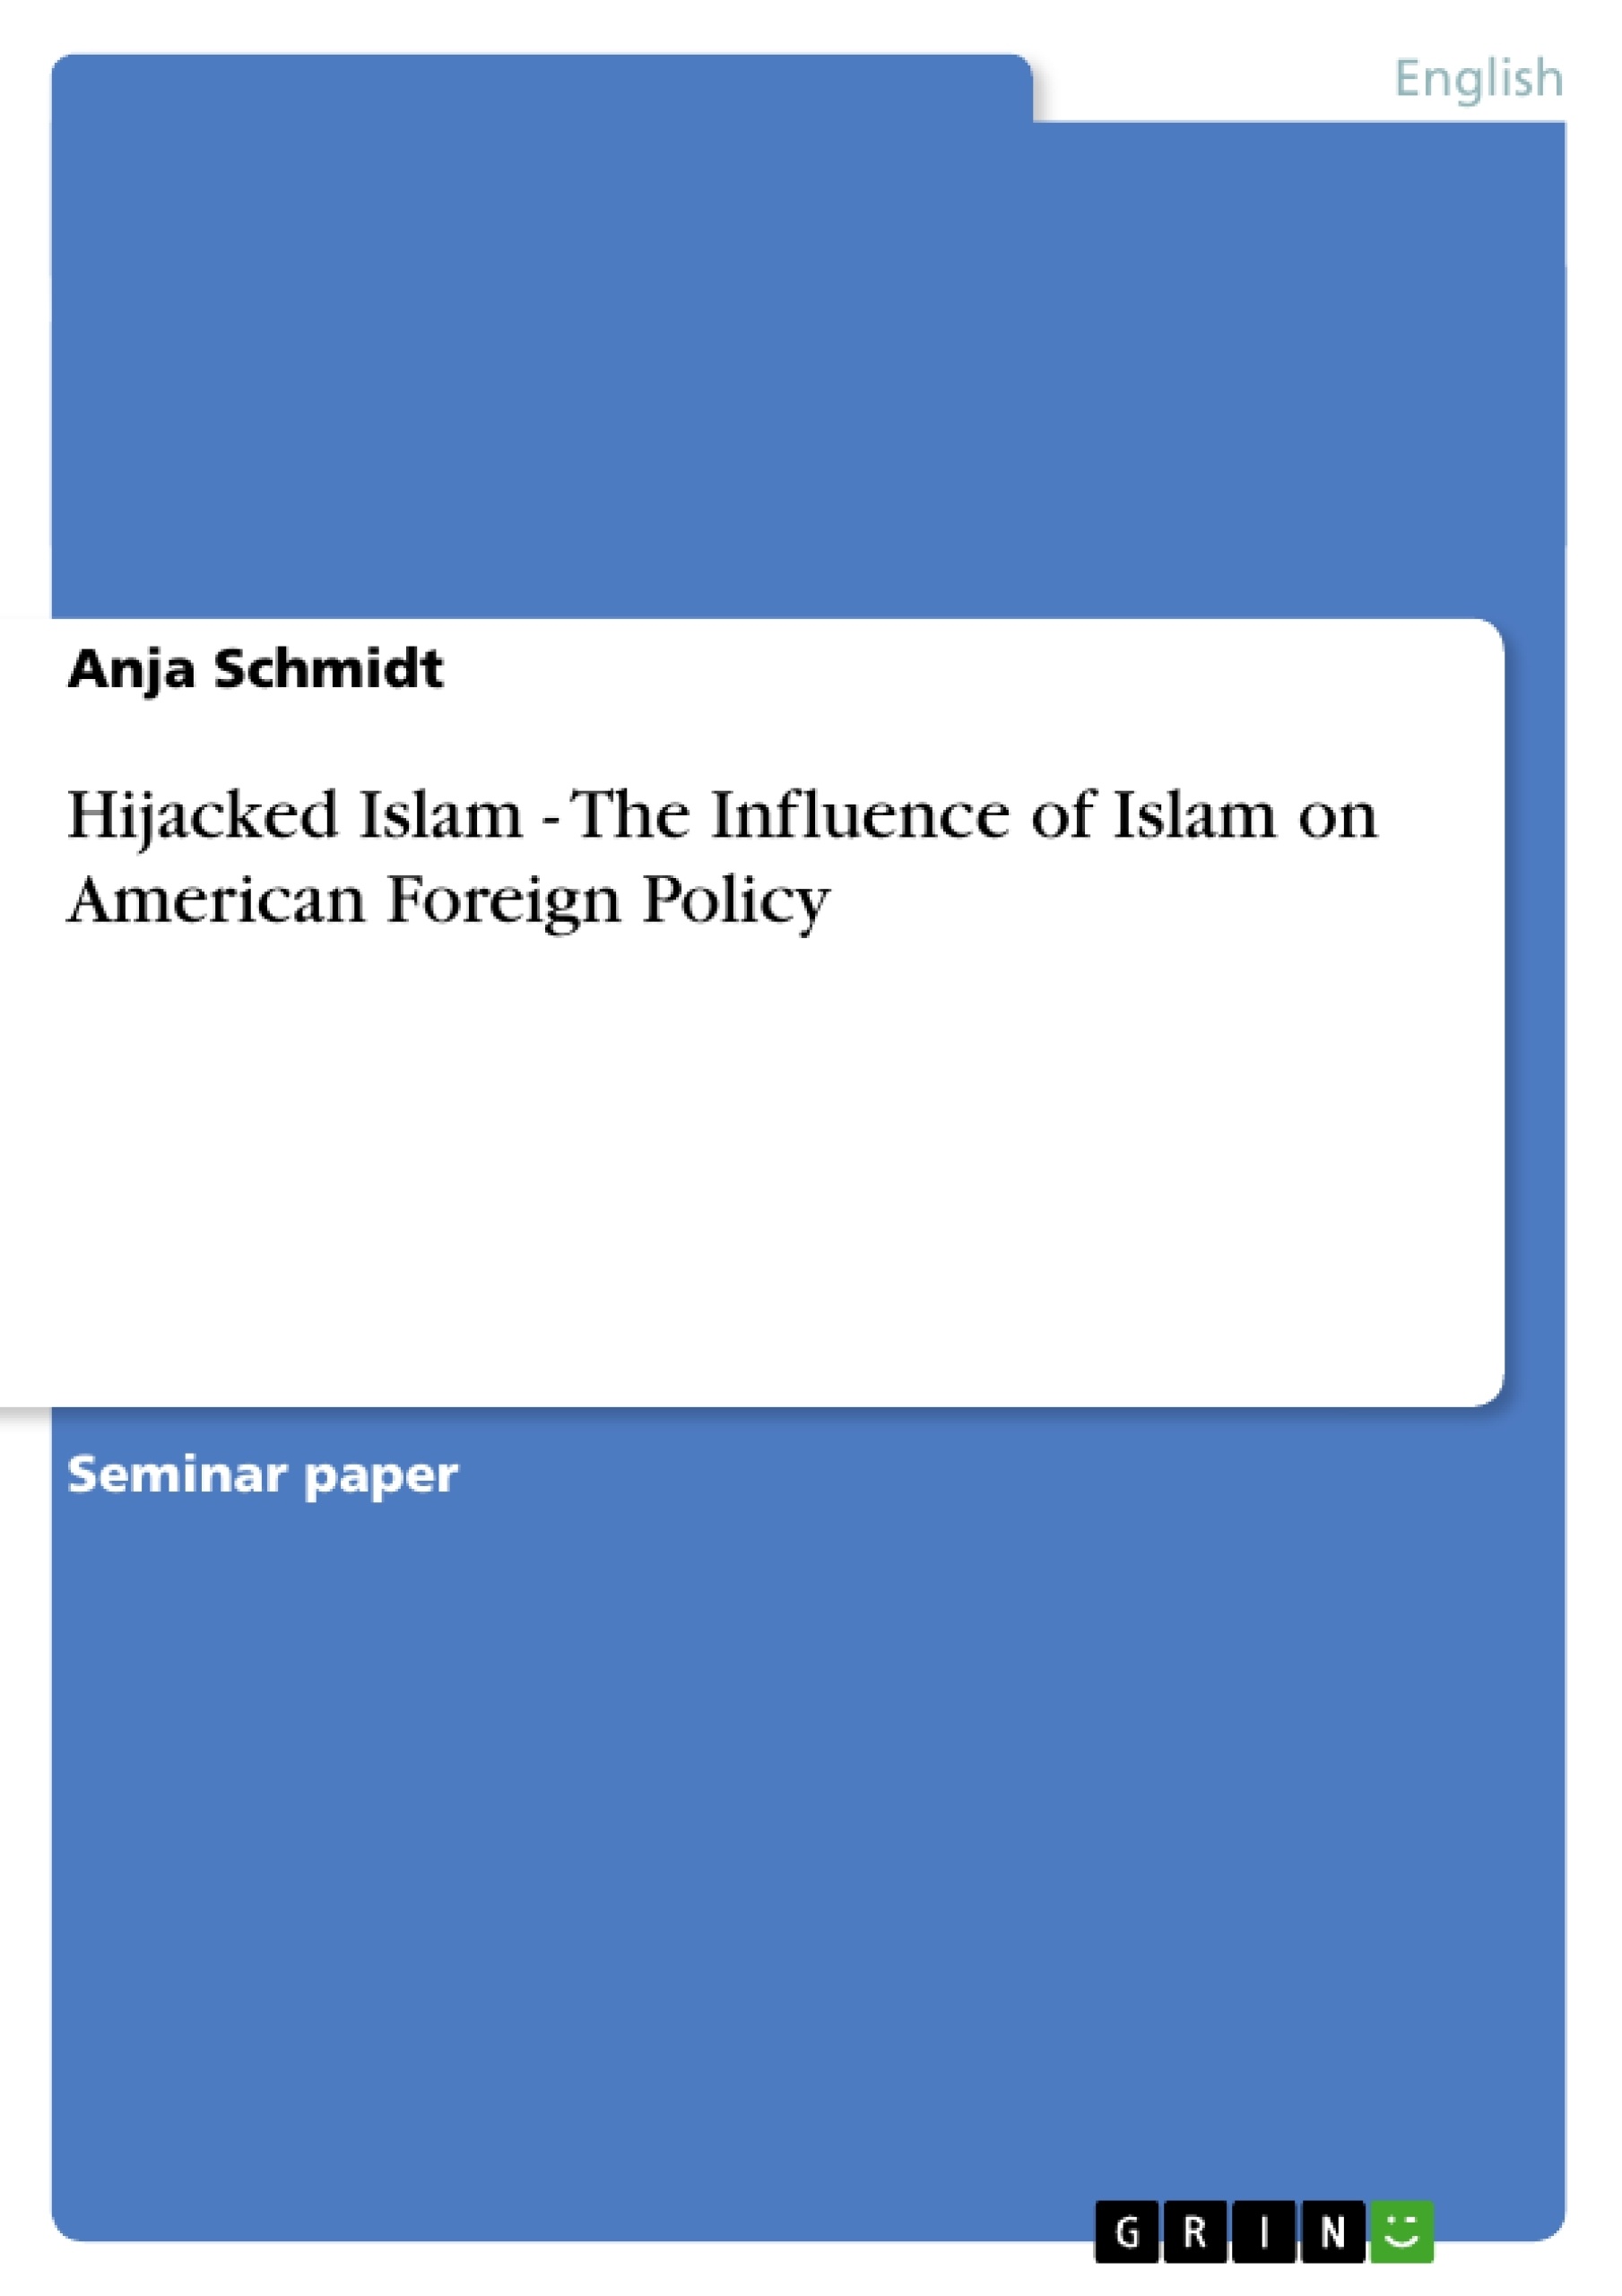 Title: Hijacked Islam - The Influence of Islam on American Foreign Policy